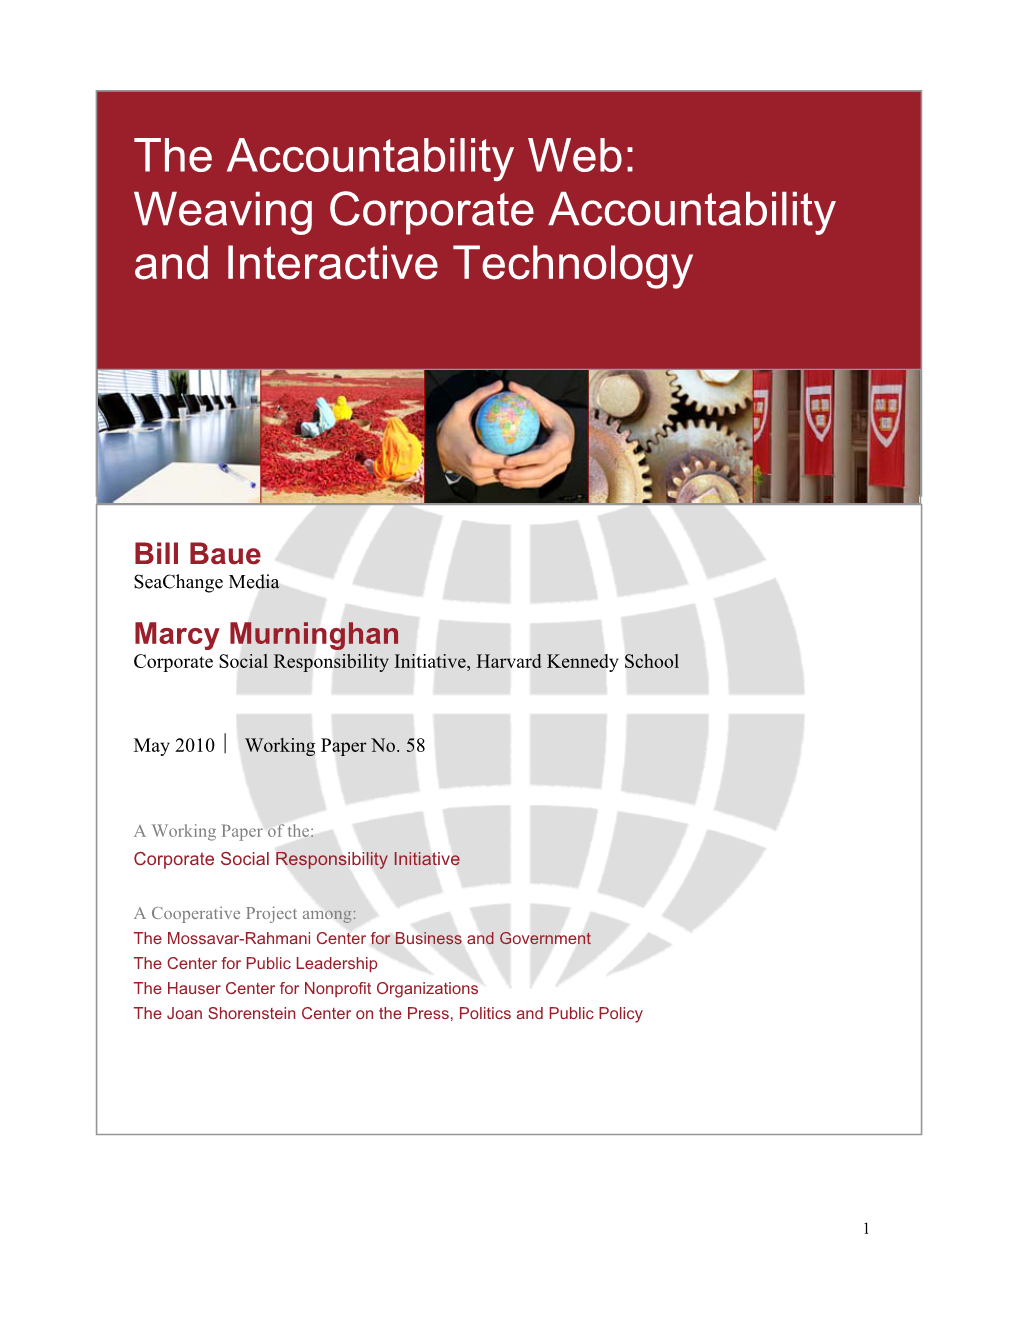 Weaving Corporate Accountability and Interactive Technology